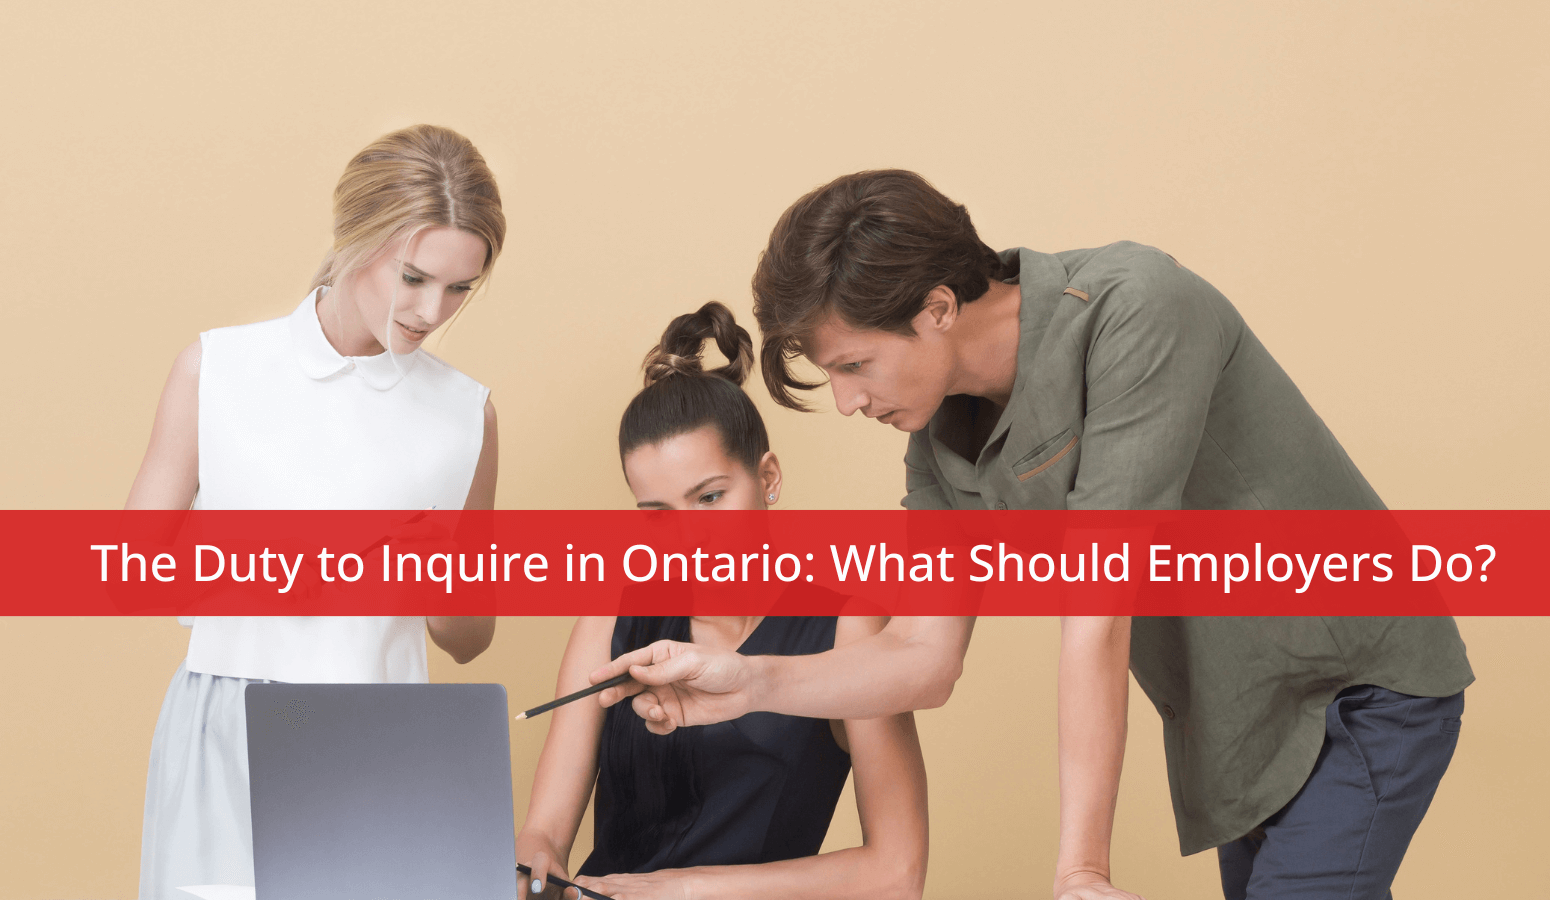 Featured image for “The Duty to Inquire in Ontario: What Should Employers Do?”